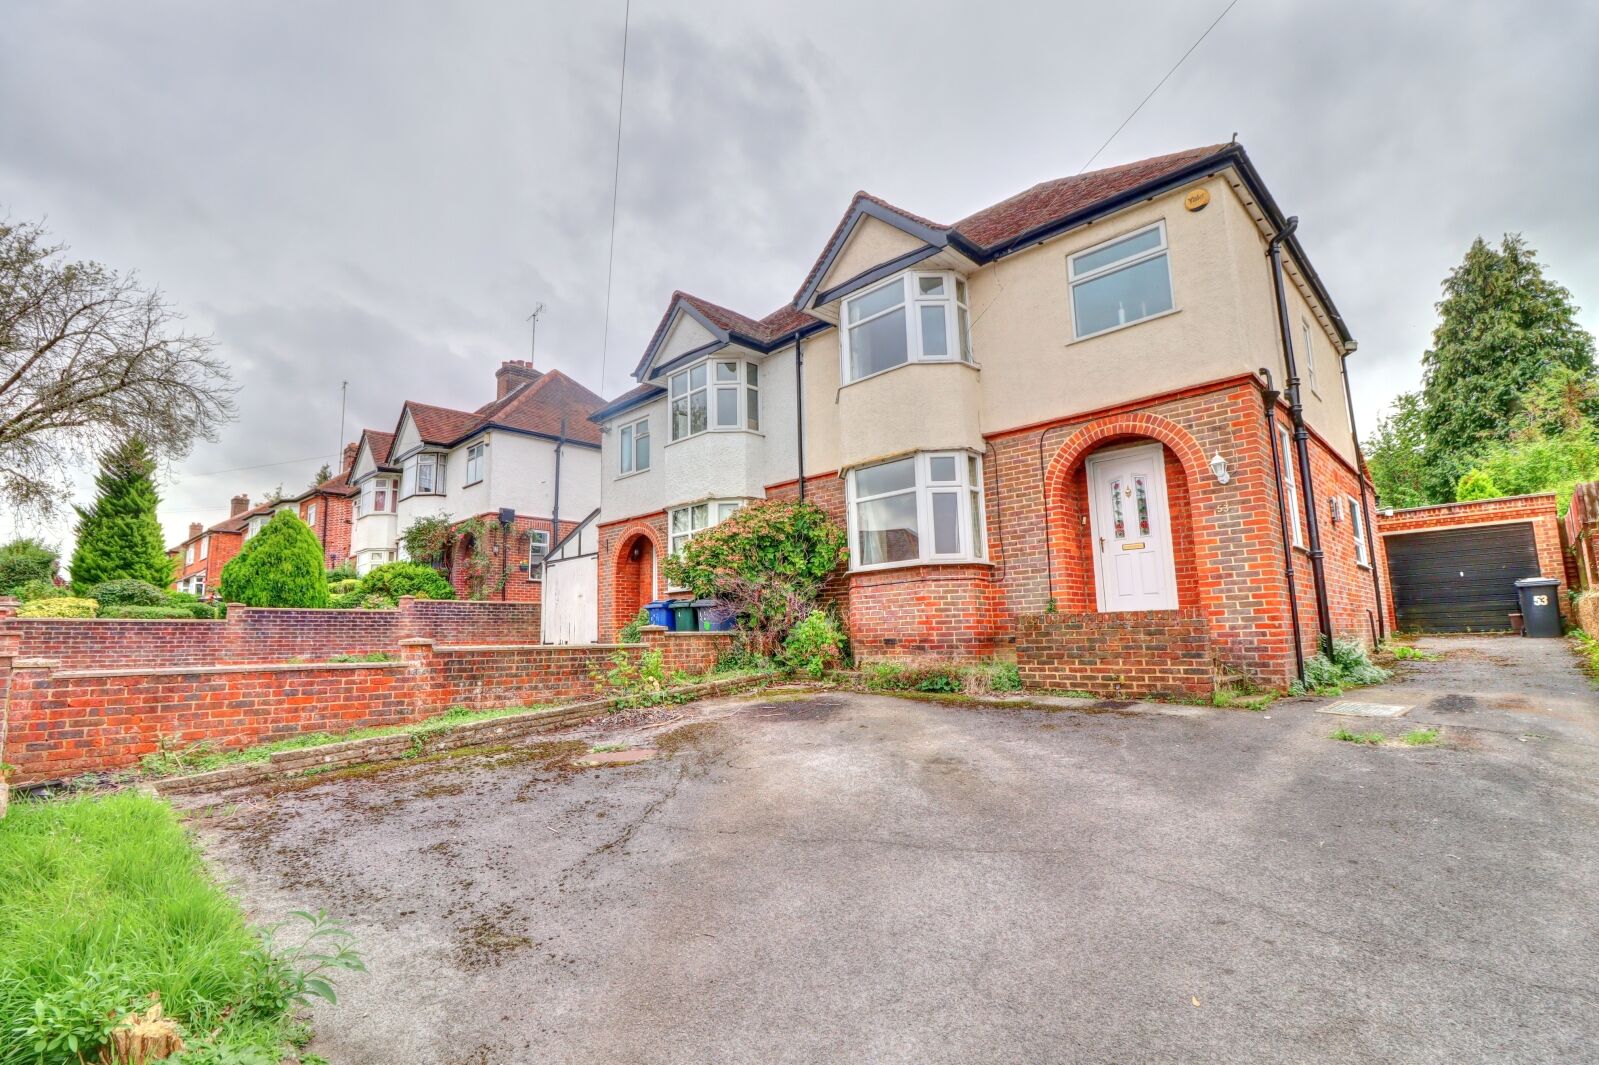 3 bedroom semi detached house to rent, Available now Eaton Avenue, High Wycombe, HP12, main image